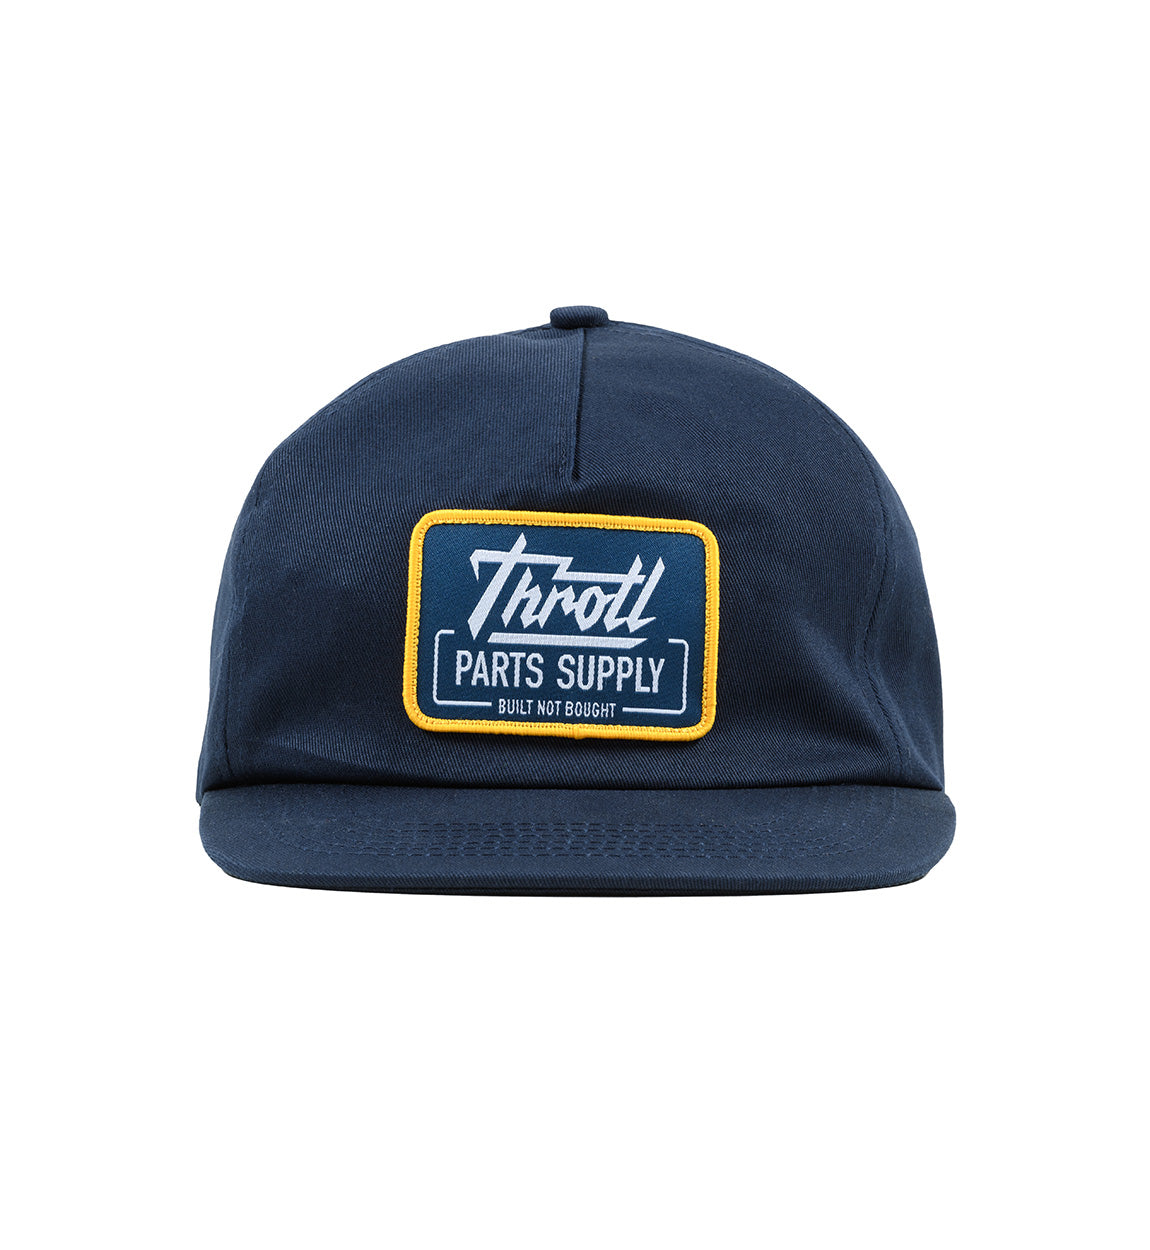 Image of Throtl PARTS SUPPLY Unstructured Snapback